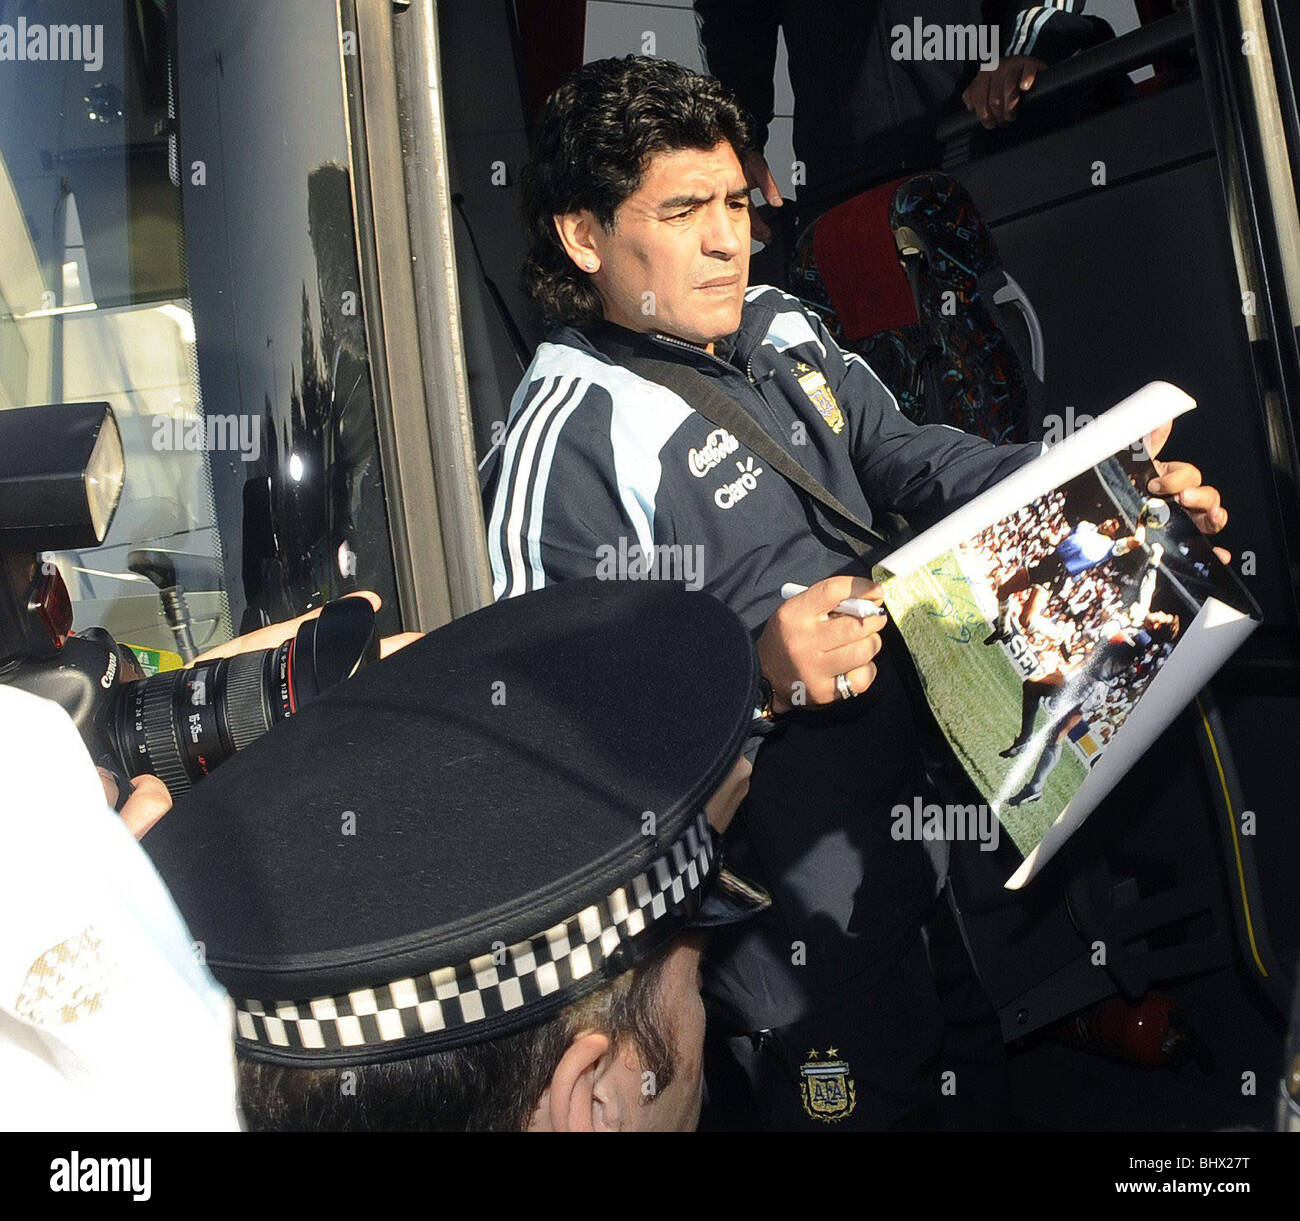 Argentina football legend and new head coach of the national team, Diego Maradona signing a picture of his famous Hand of God goal against England in the 1986 World Cup as he arrives at Glasgow Airport ahead of the Scotland v Argentina friendly international at Hampden Park. 16th November 2008. Stock Photo